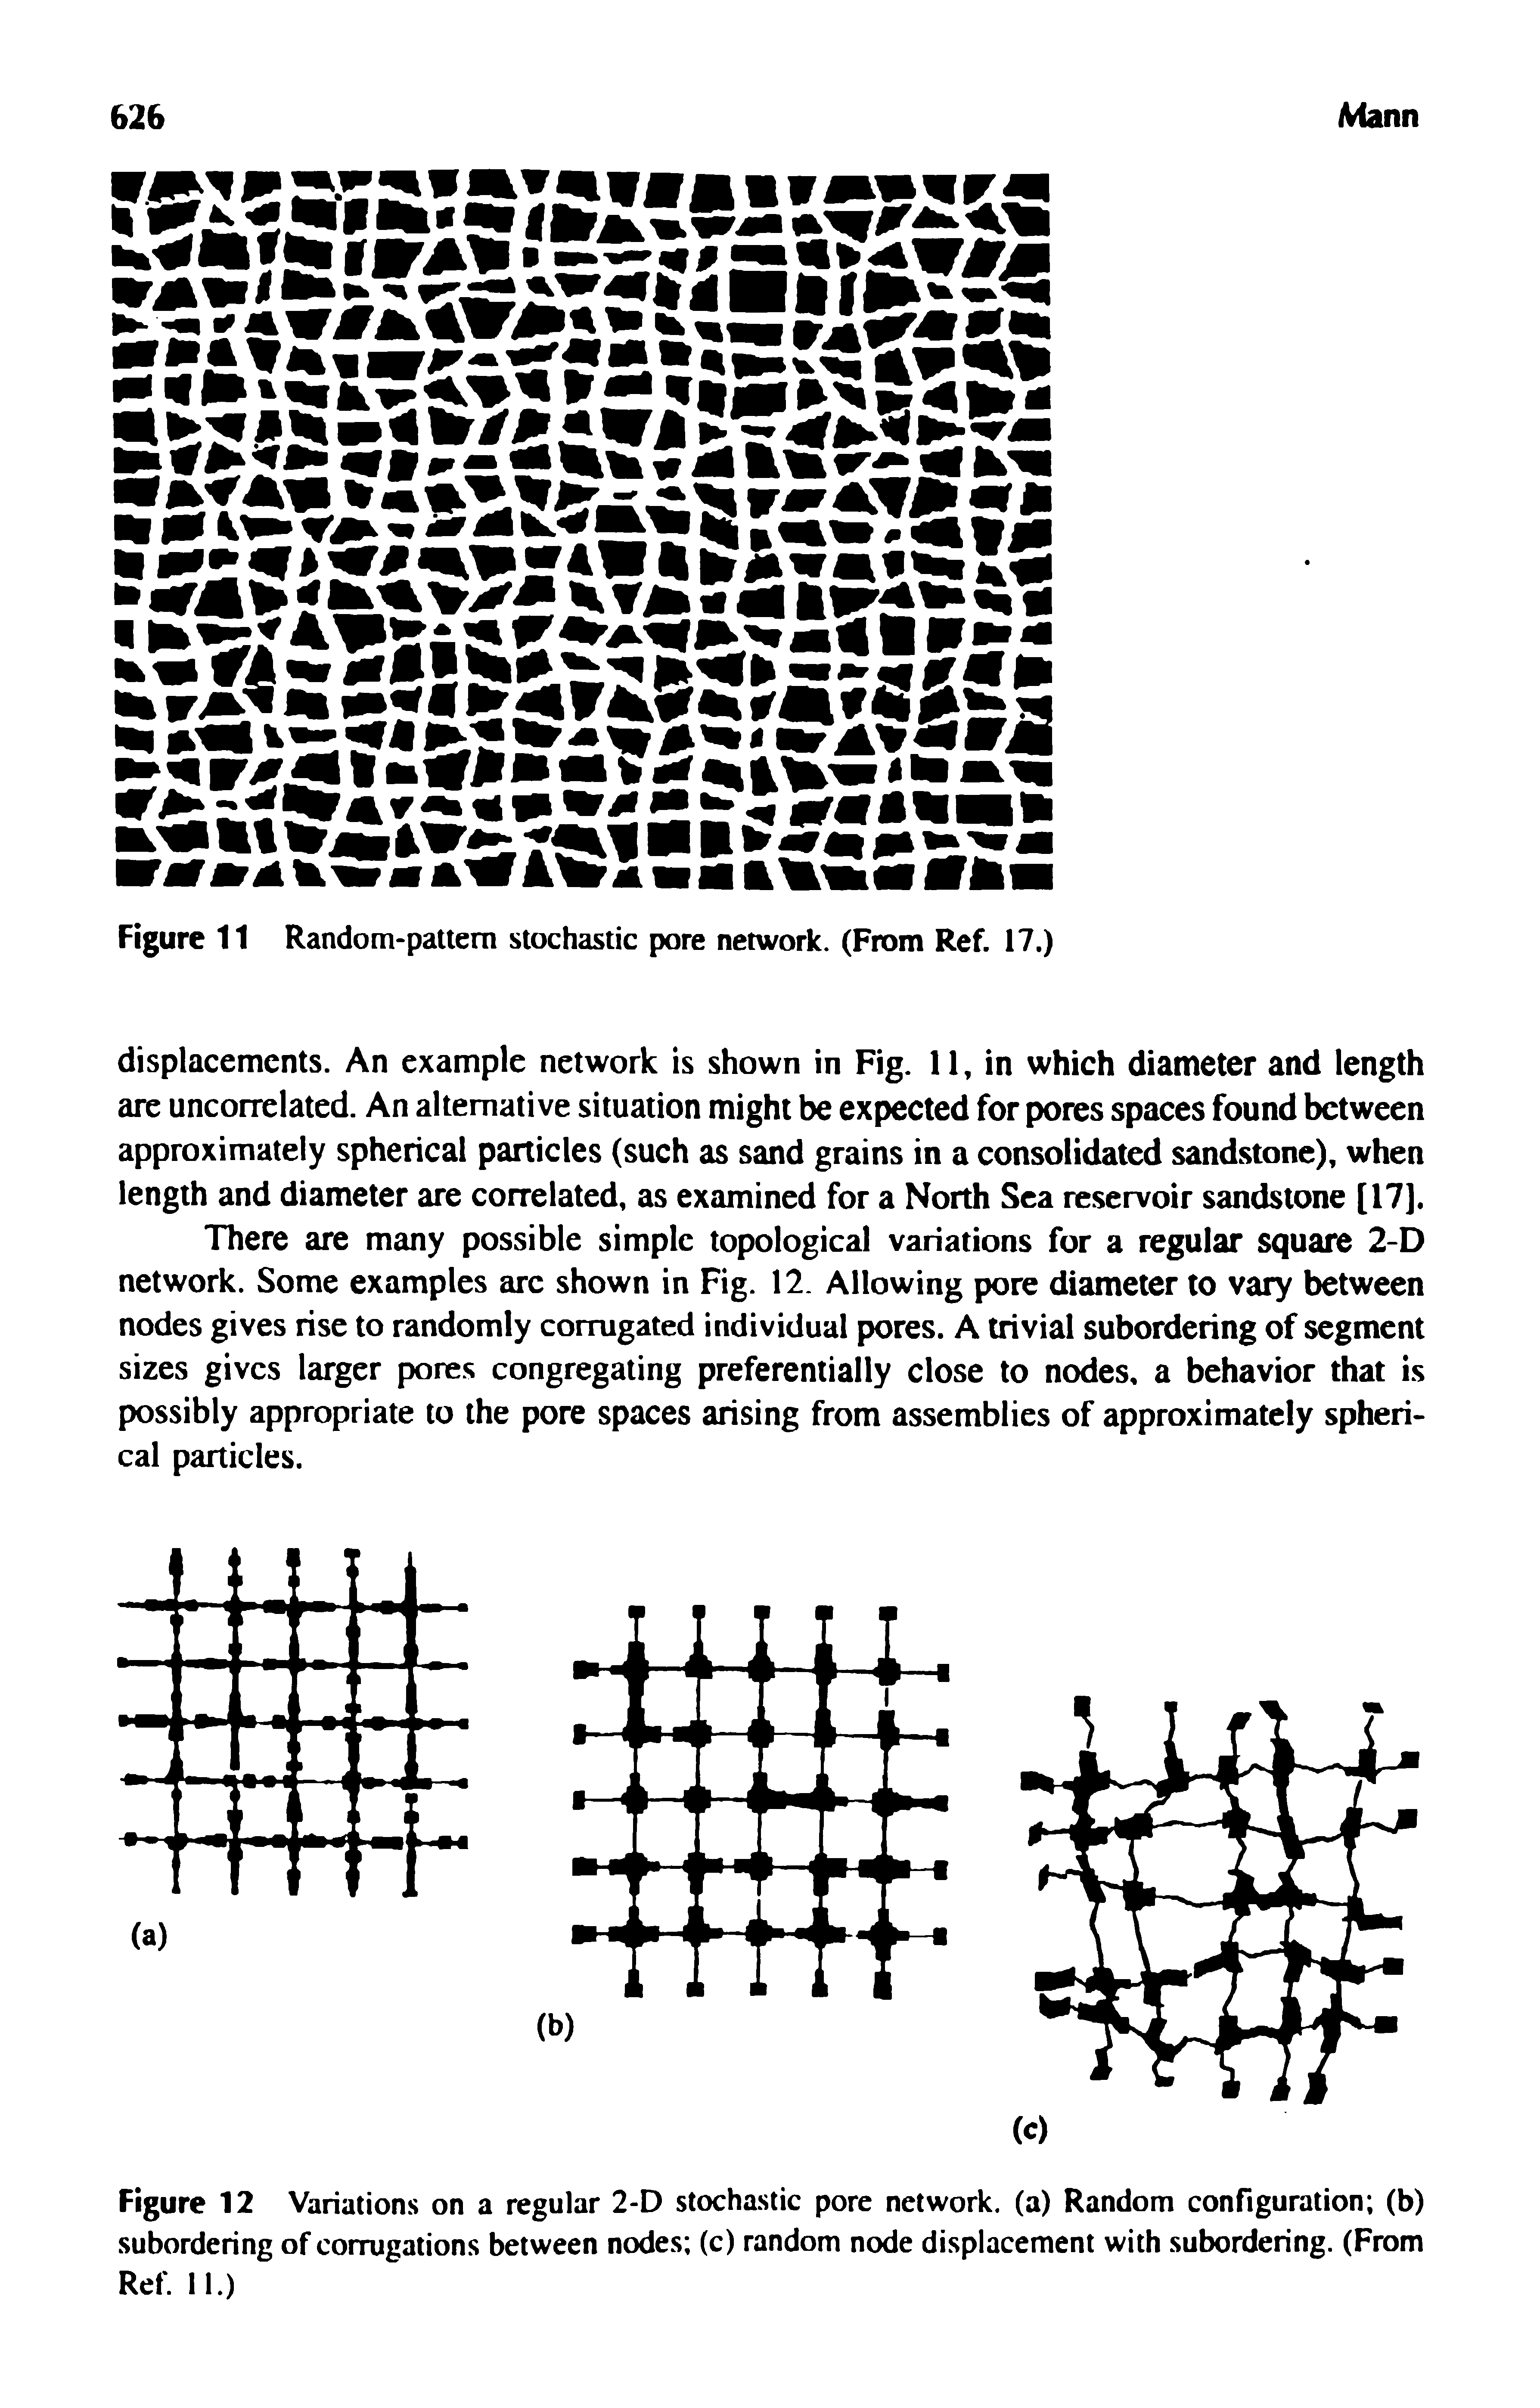 Figure 12 Variations on a regular 2-D stochastic pore network, (a) Random configuration (b) subordering of corrugations between nodes (c) random node displacement with subordering. (From Ref. 11.)...